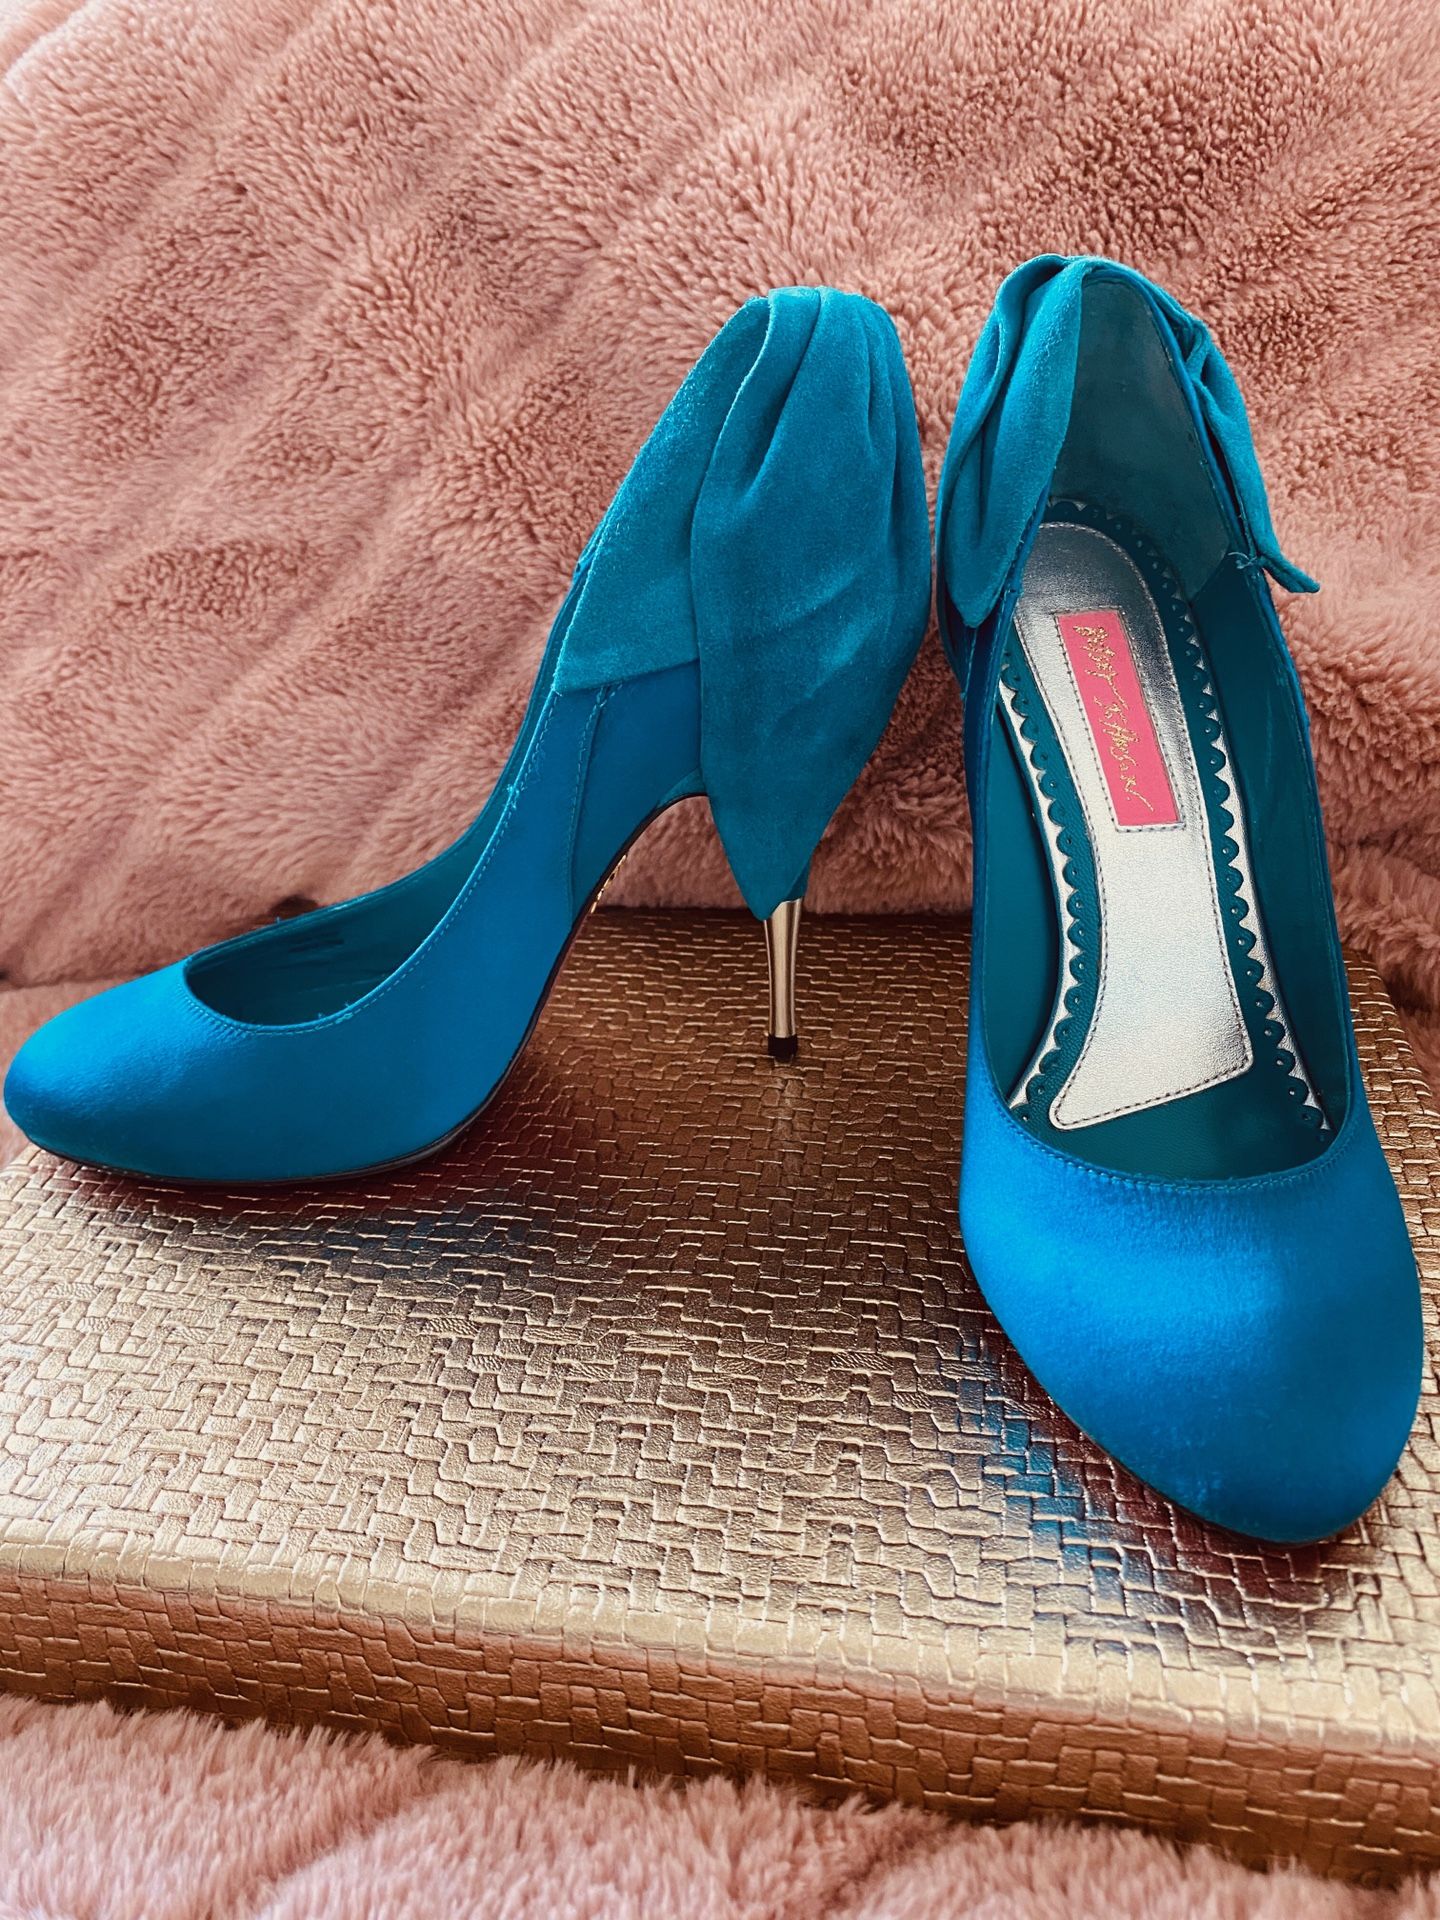 👠 Shoes Betsey Johnson- Turquoise. Brand New